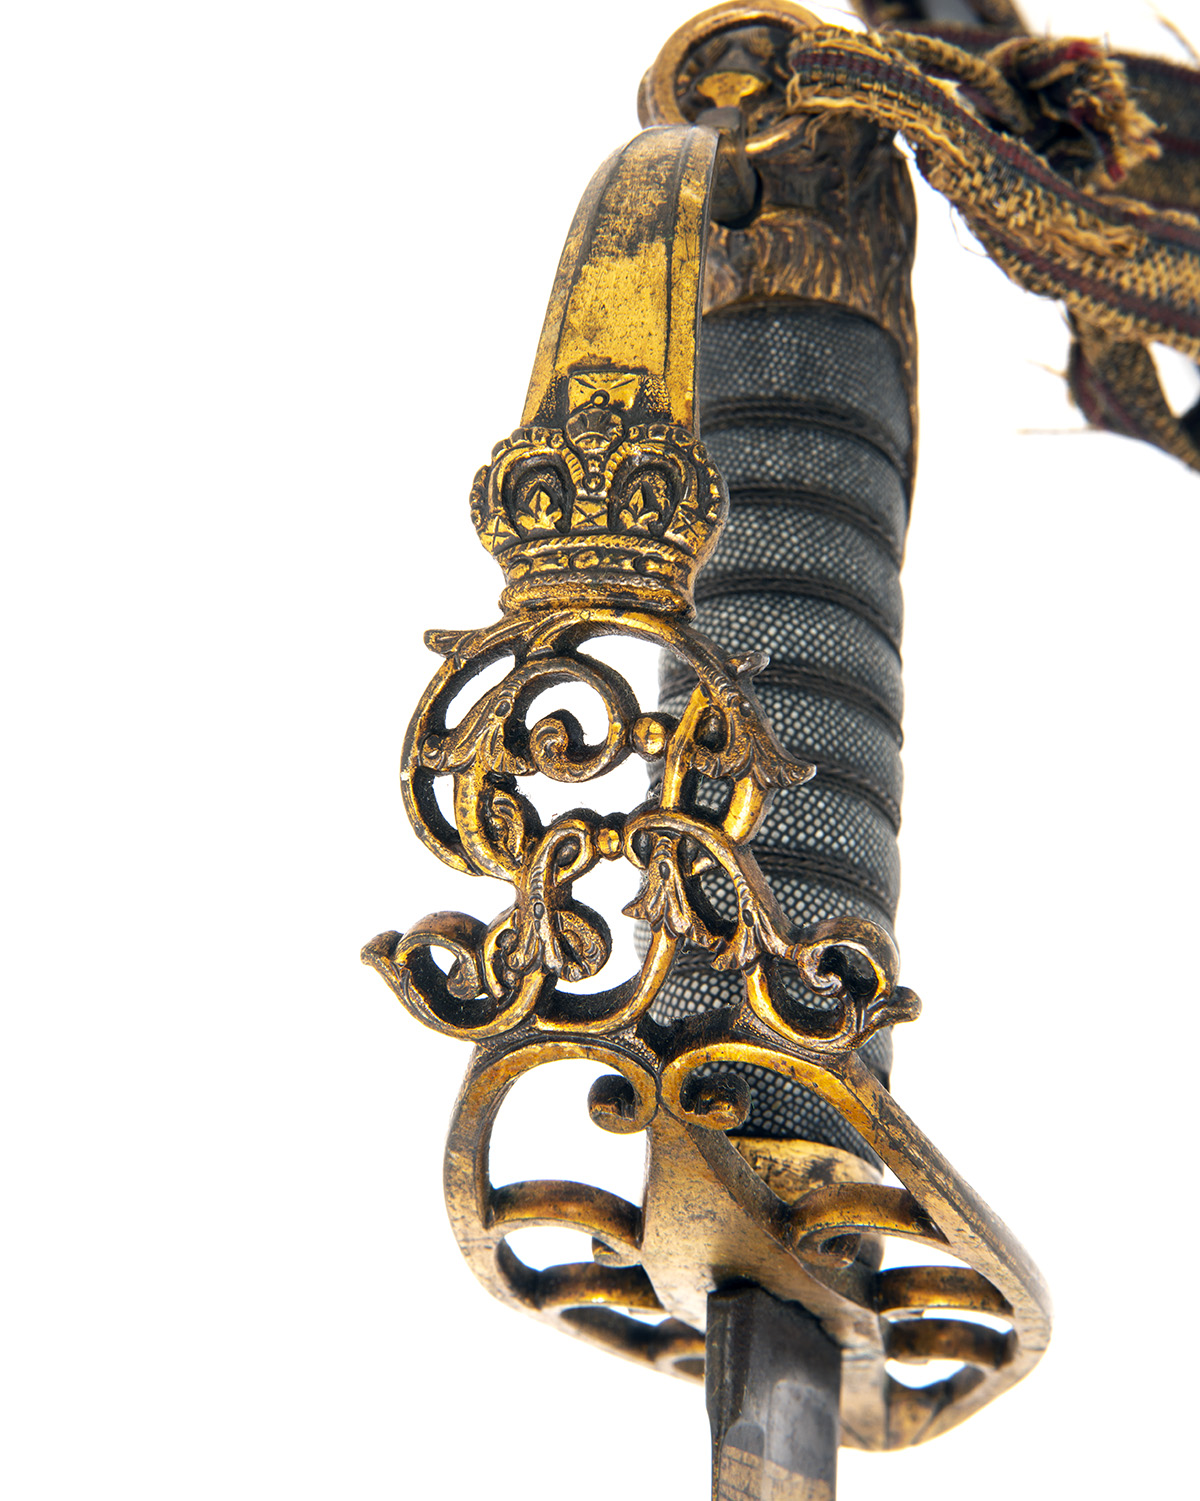 A BRITISH 1803 PATTERN INFANTRY or FLANK OFFICER'S SWORD WITH BLUE AND GILT BLADE, UNSIGNED, circa - Image 3 of 7